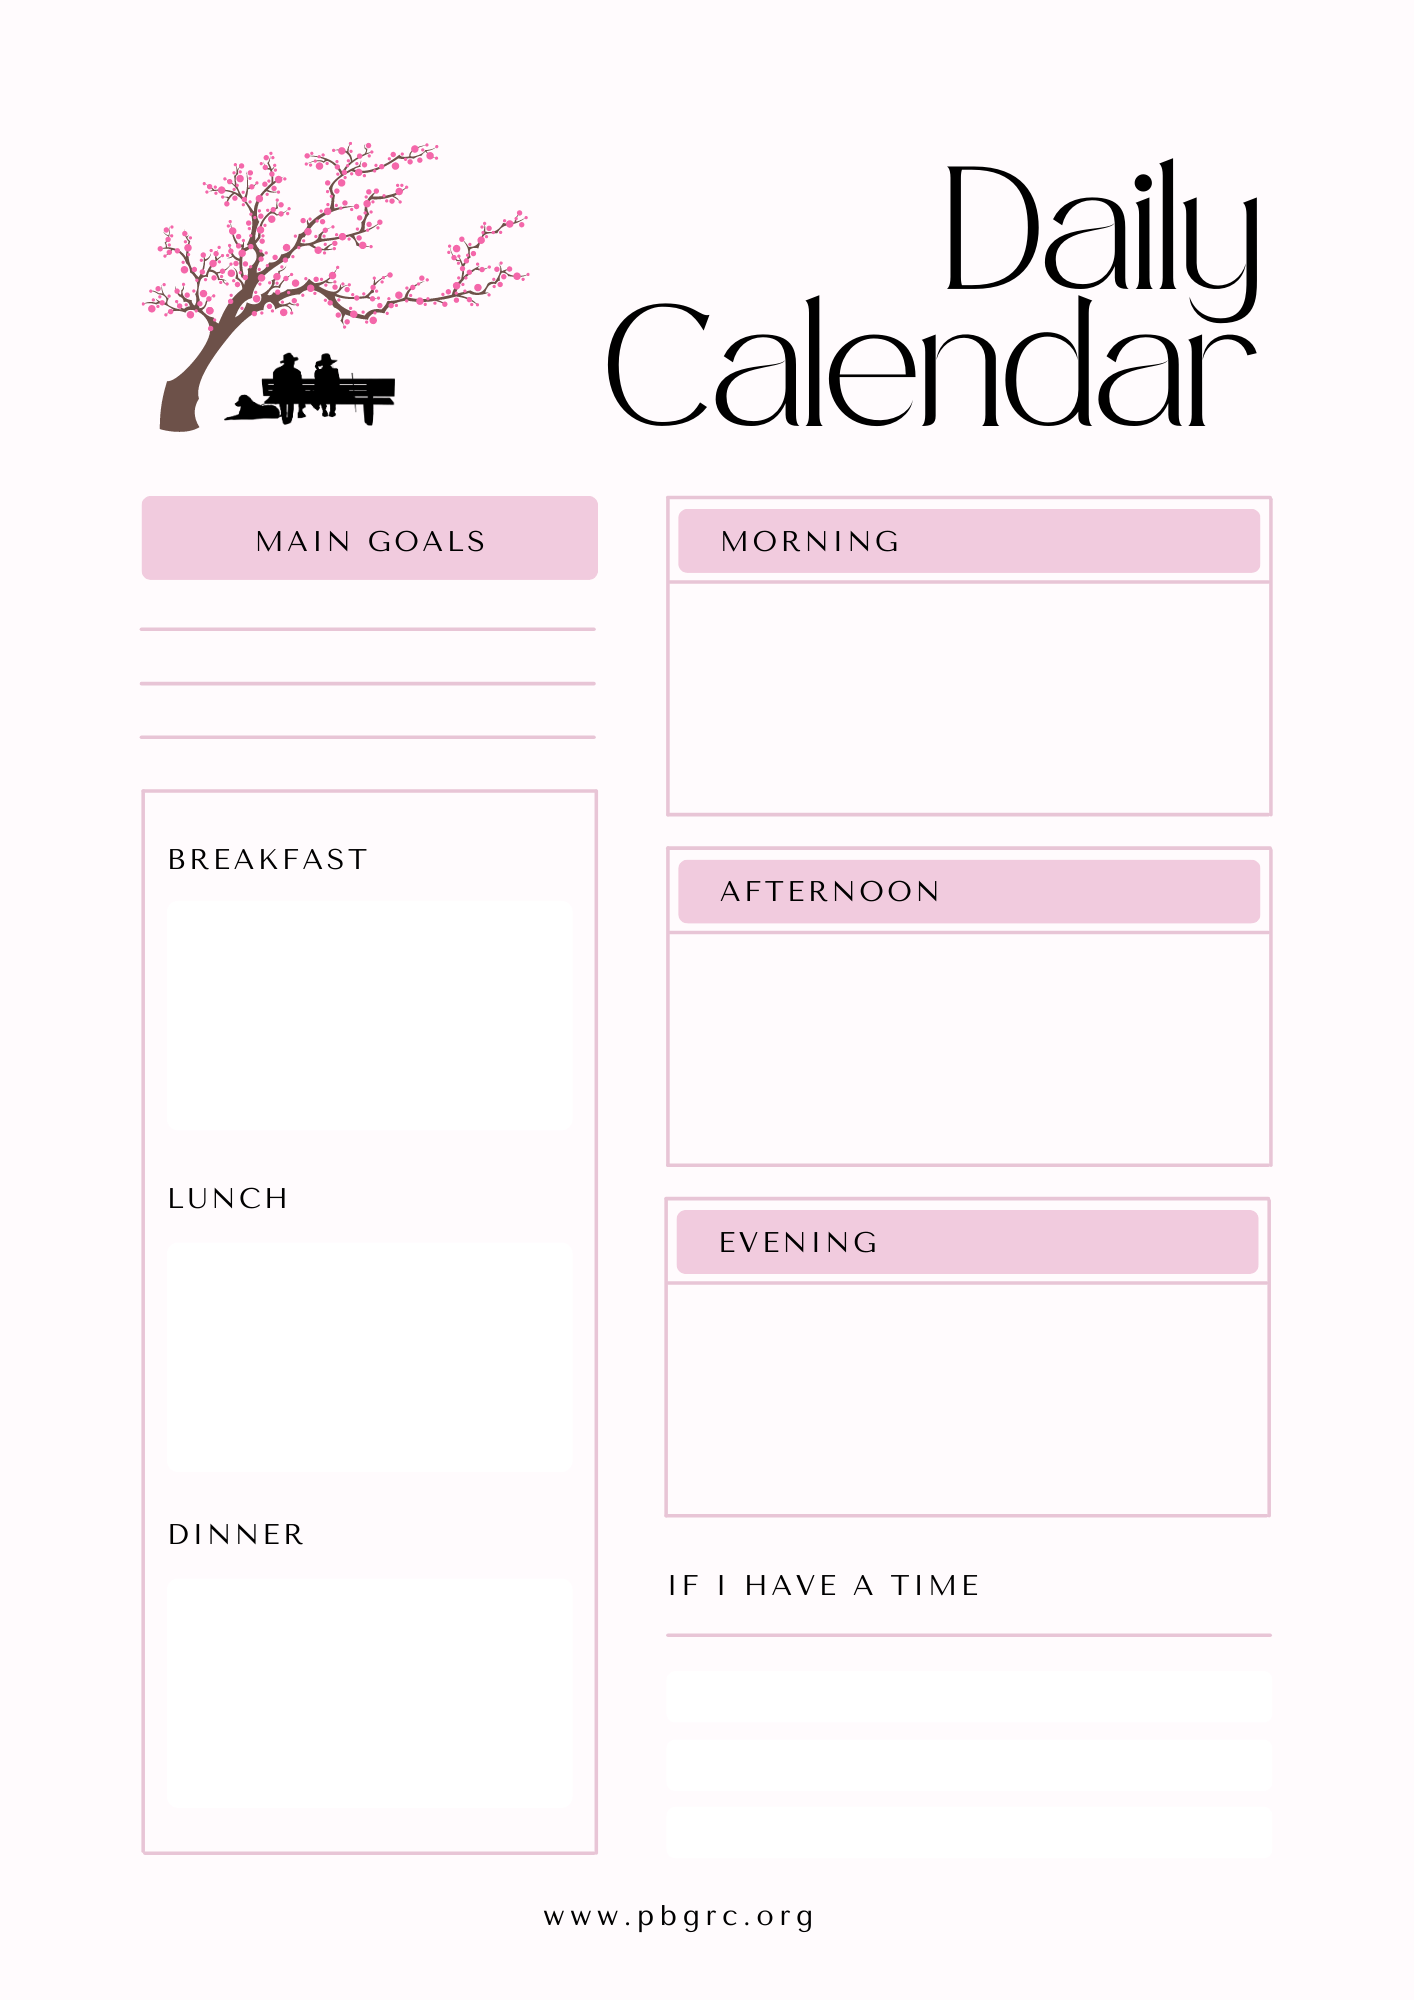 PDF Daily Schedule Template for Time Management